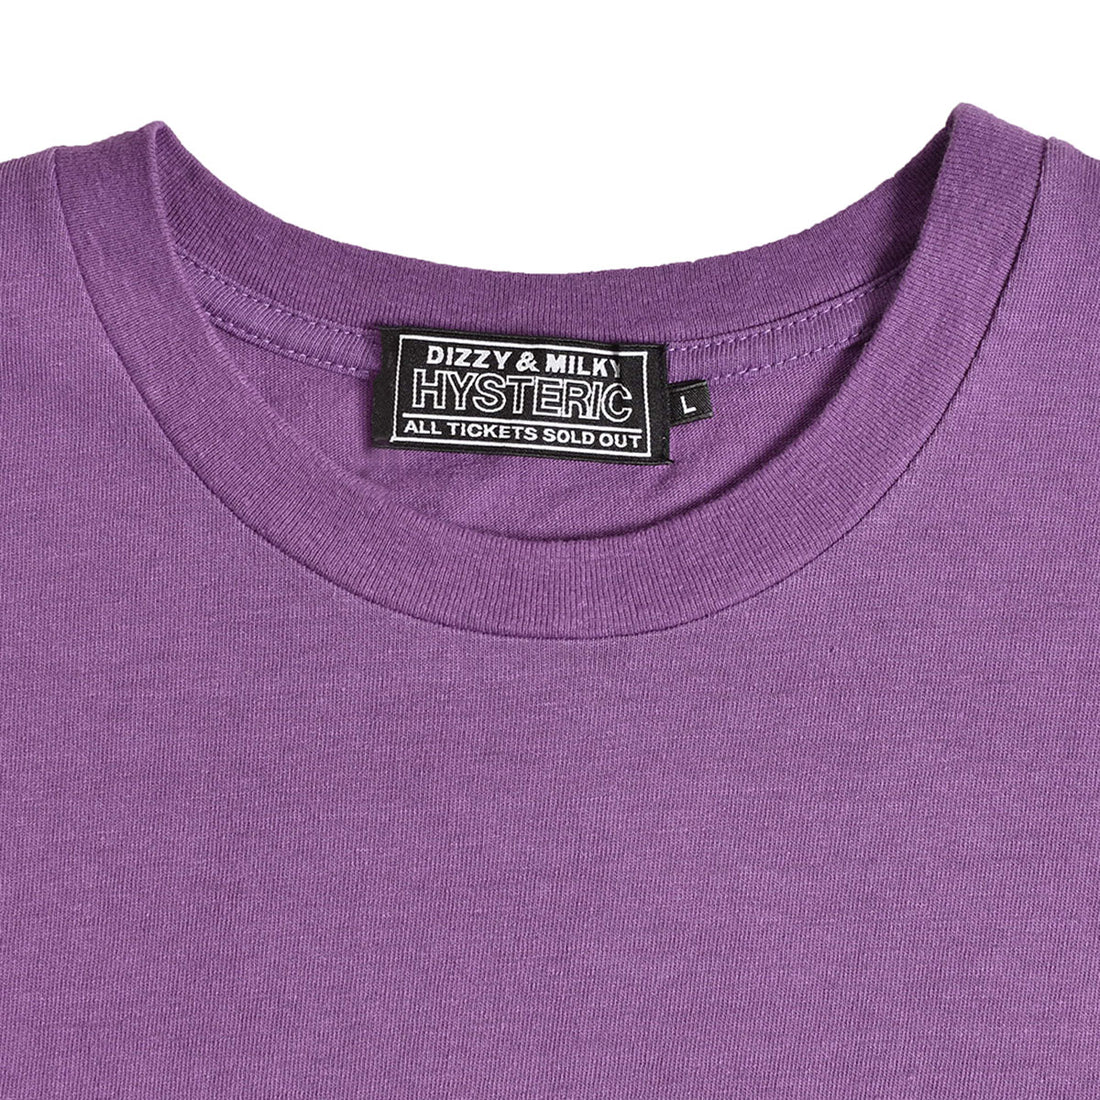 [HYSTERIC GLAMOUR]THINK HYS Tシャツ/PURPLE(02232CT05)